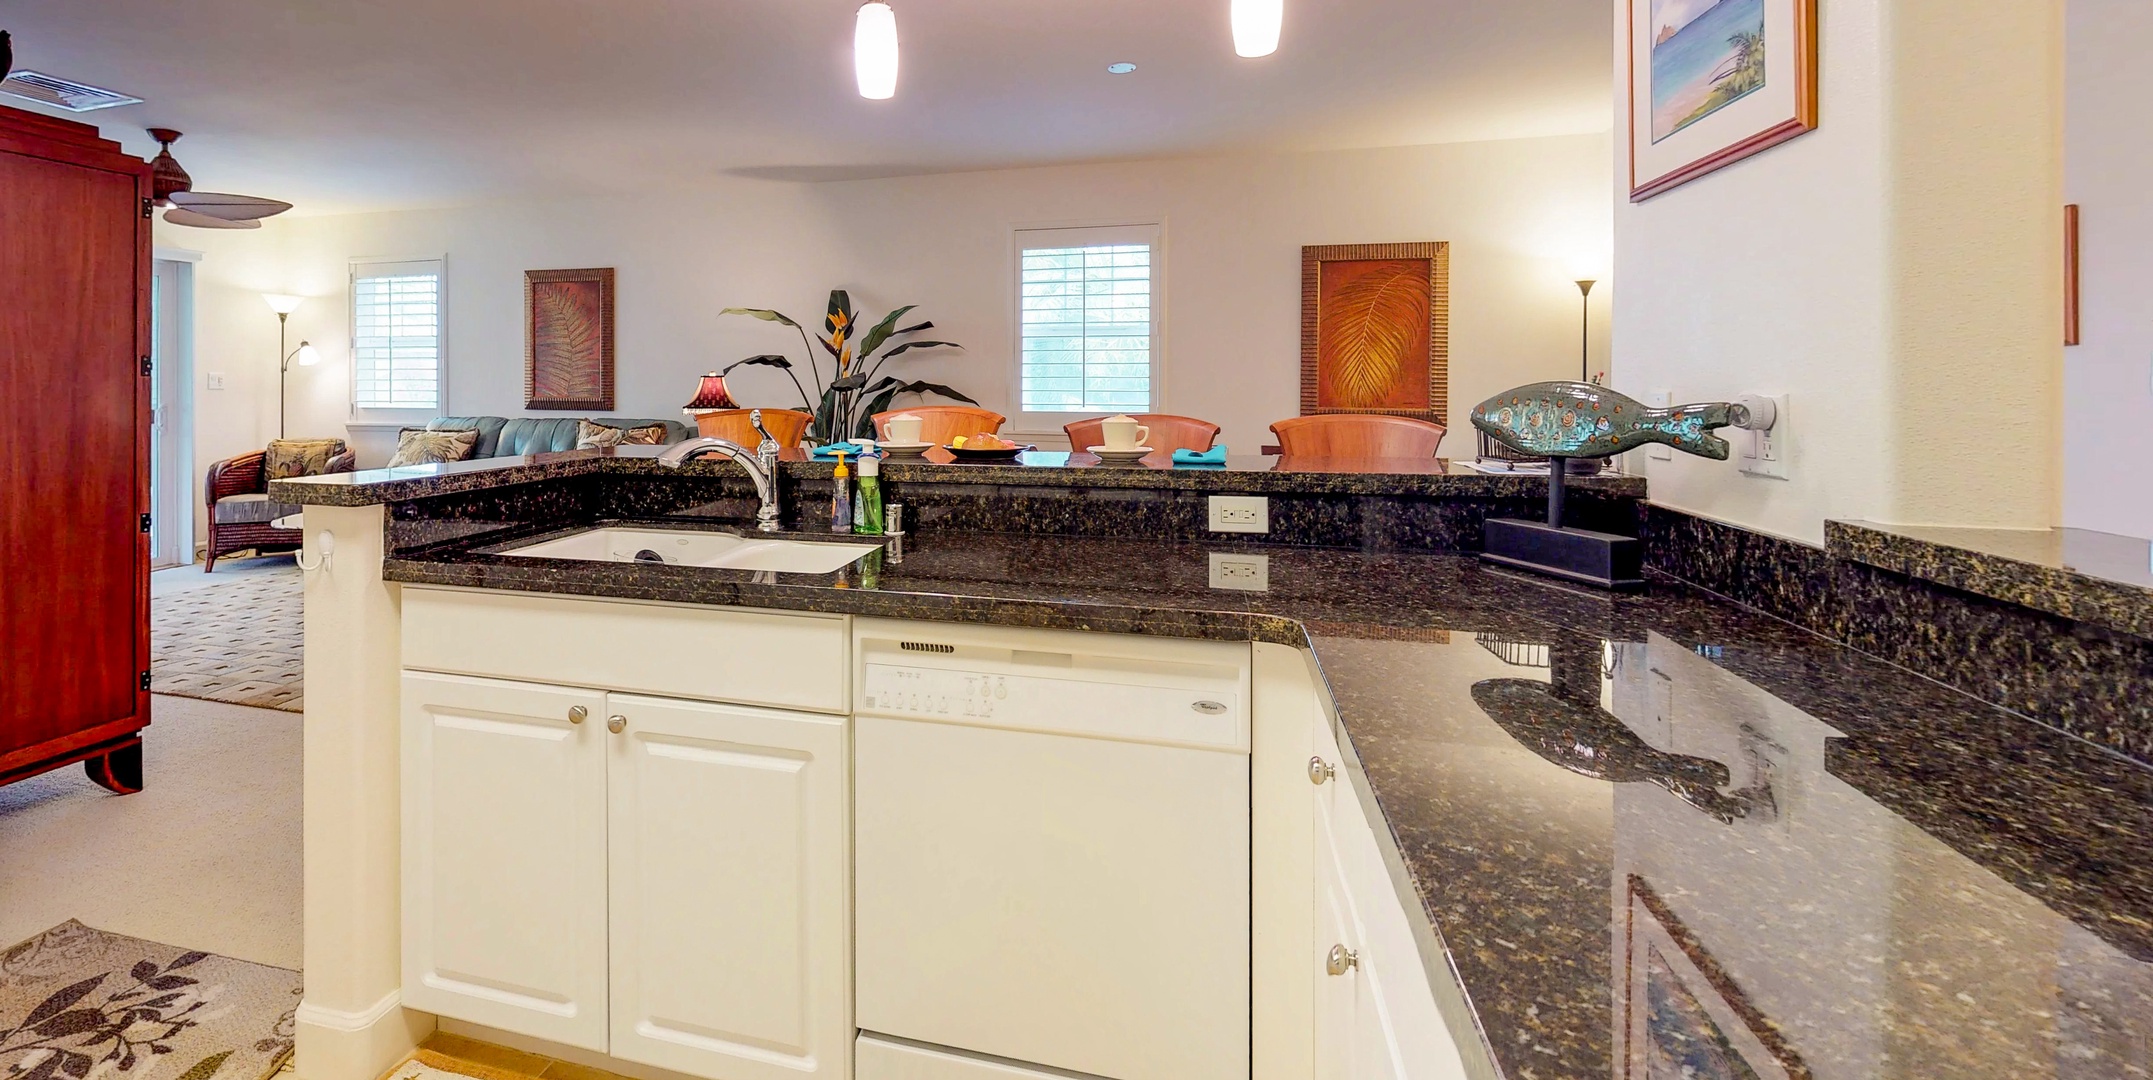 Kapolei Vacation Rentals, Ko Olina Kai 1105E - Wide counter space with ample cabinetry to store your getaway kitchen essentials.